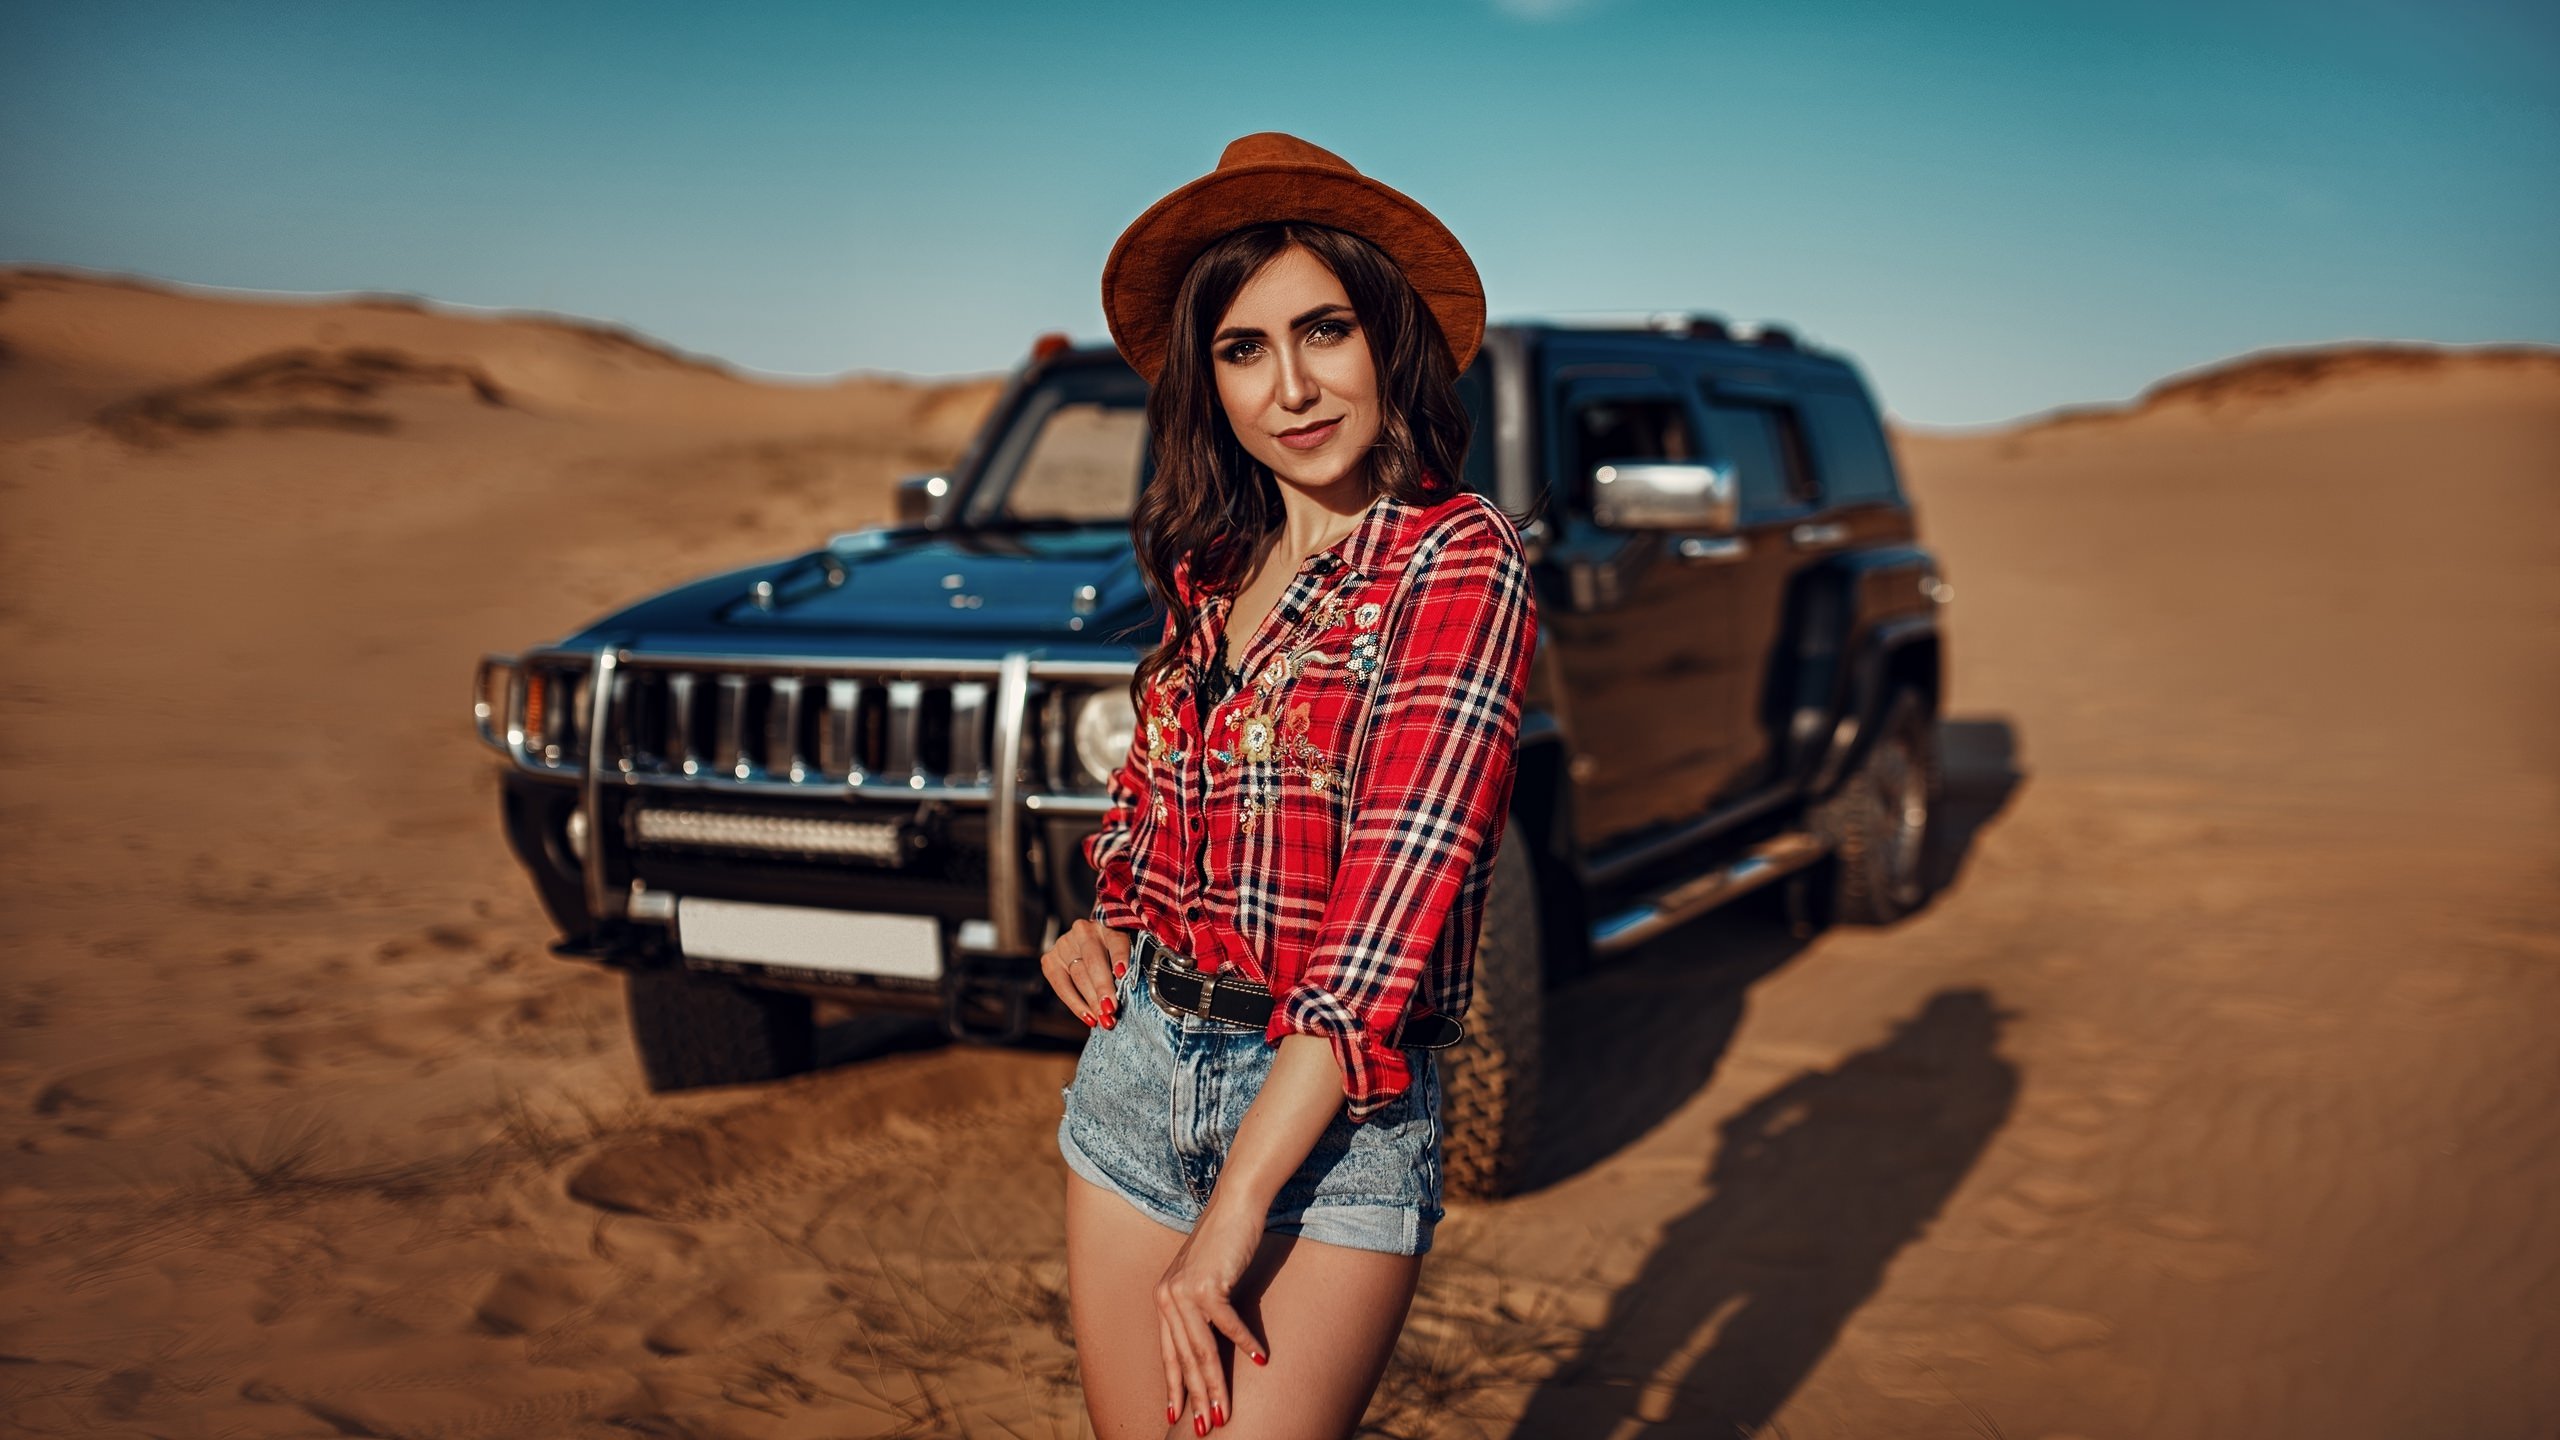 People 2560x1440 women hat women outdoors sky clouds car desert plaid shirt jean shorts women with cars smiling red nails belt Hummer American cars